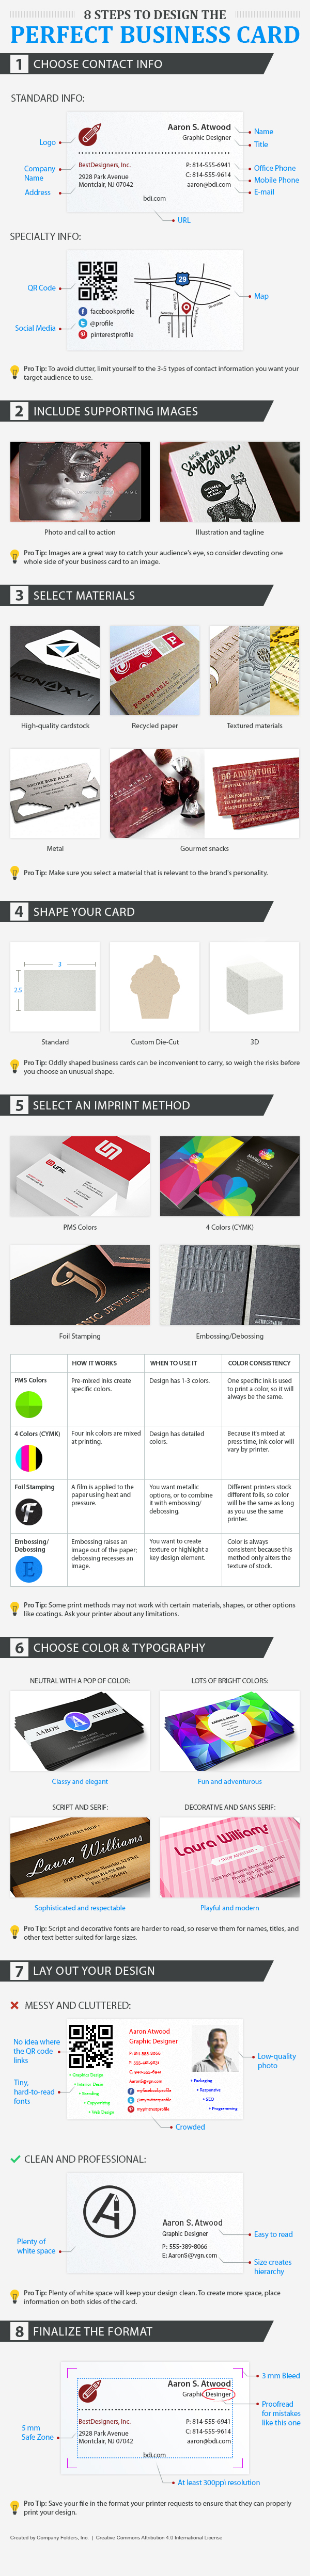 Business Card Design Infographic